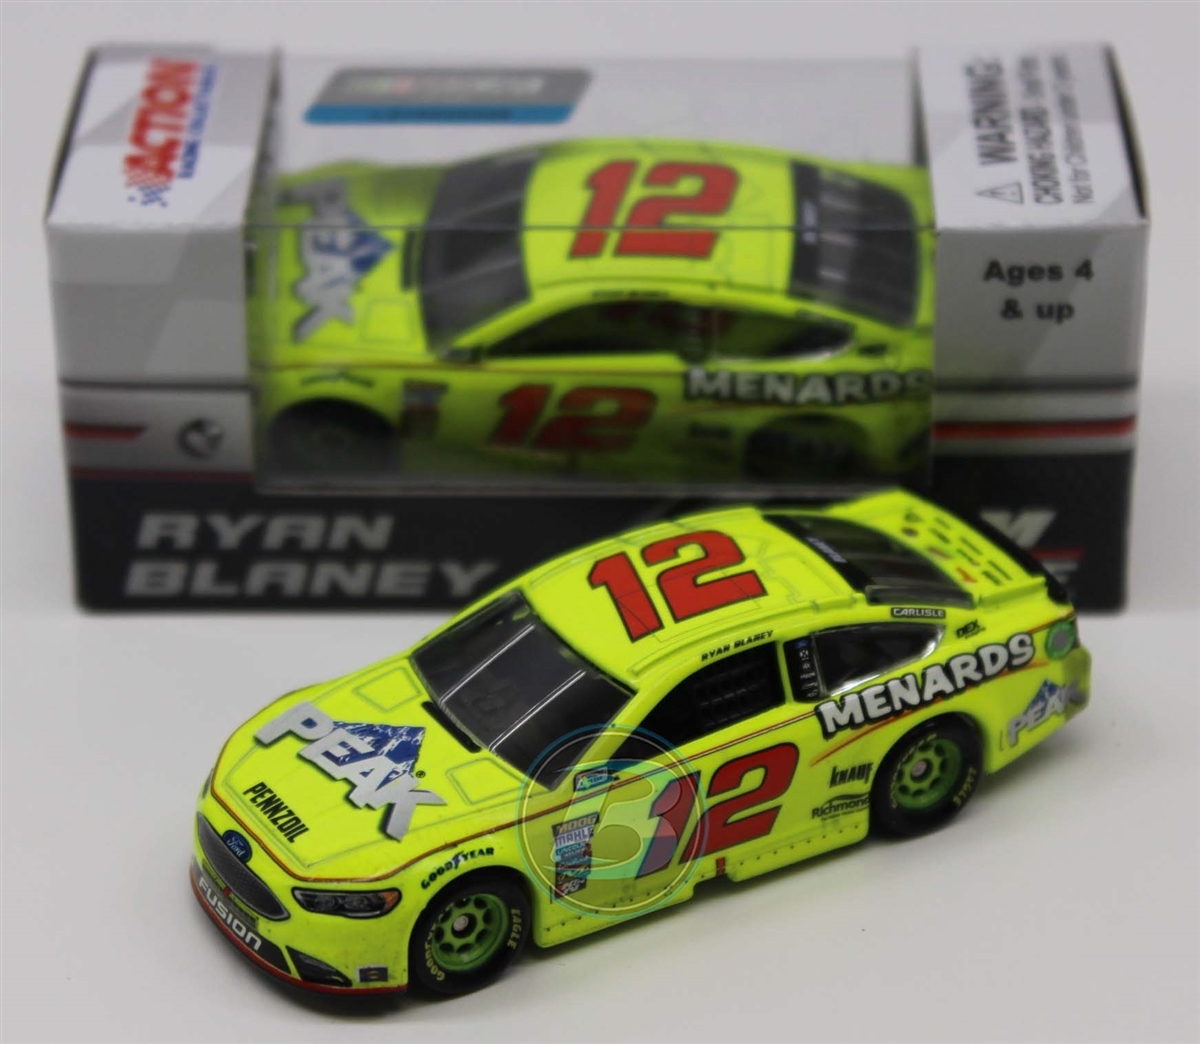 RYAN BLANEY 2018 CAN-AM DUEL WIN RACED VERSION  FORD FUSION 1/24 ACTION DIECAST